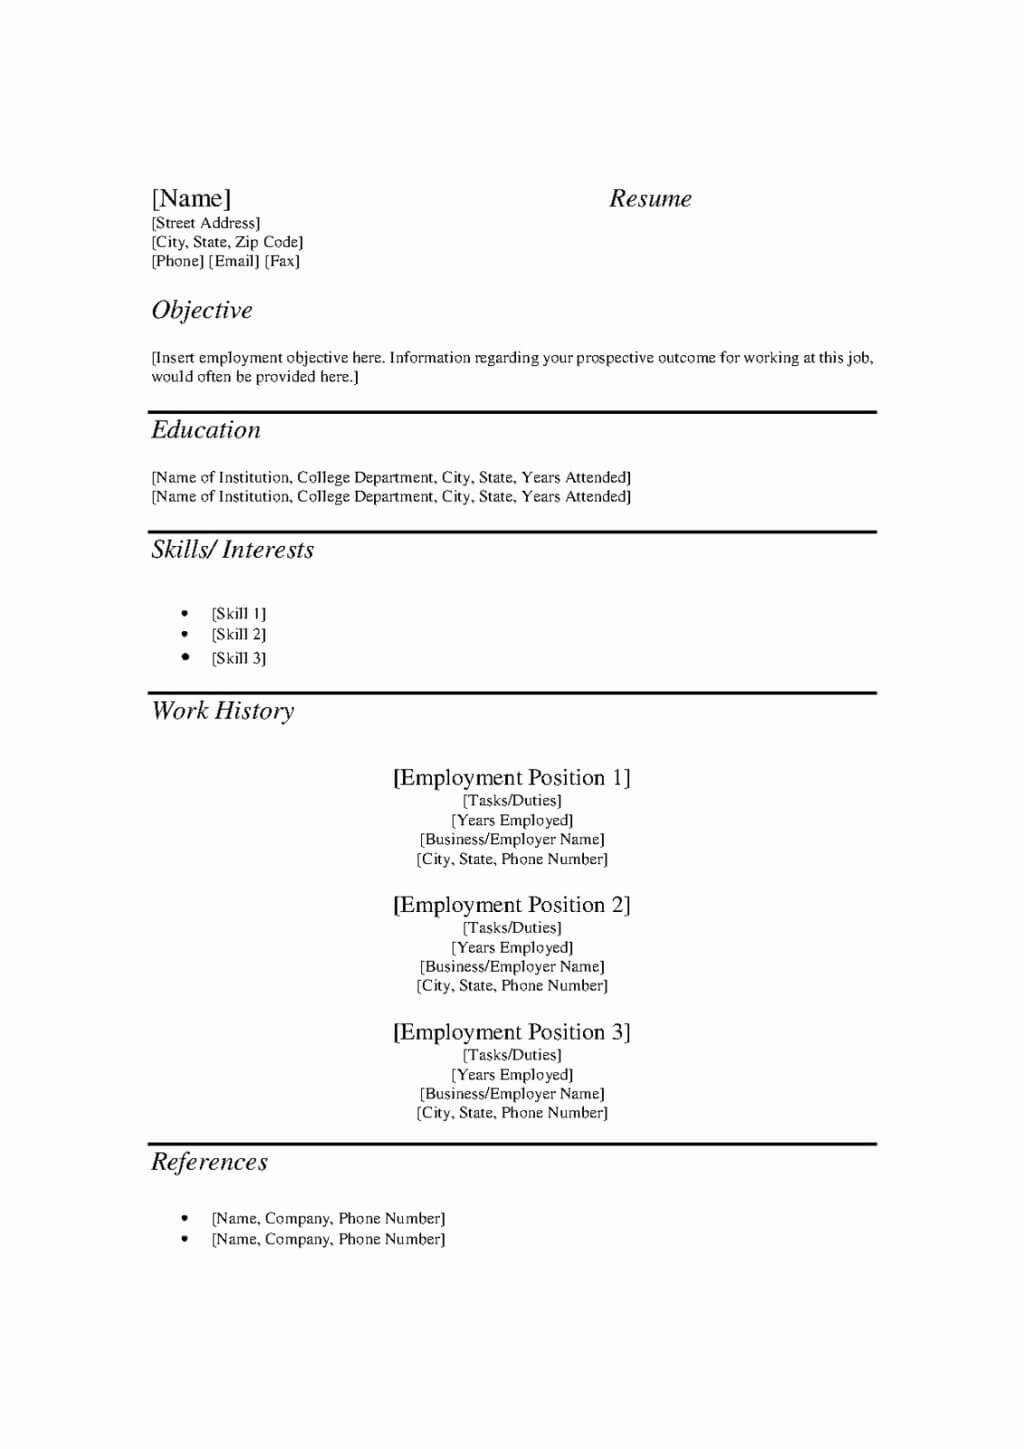 Free Blank Resume Templates For Microsoft Word – Yatay Pertaining To Free Blank Resume Templates For Microsoft Word